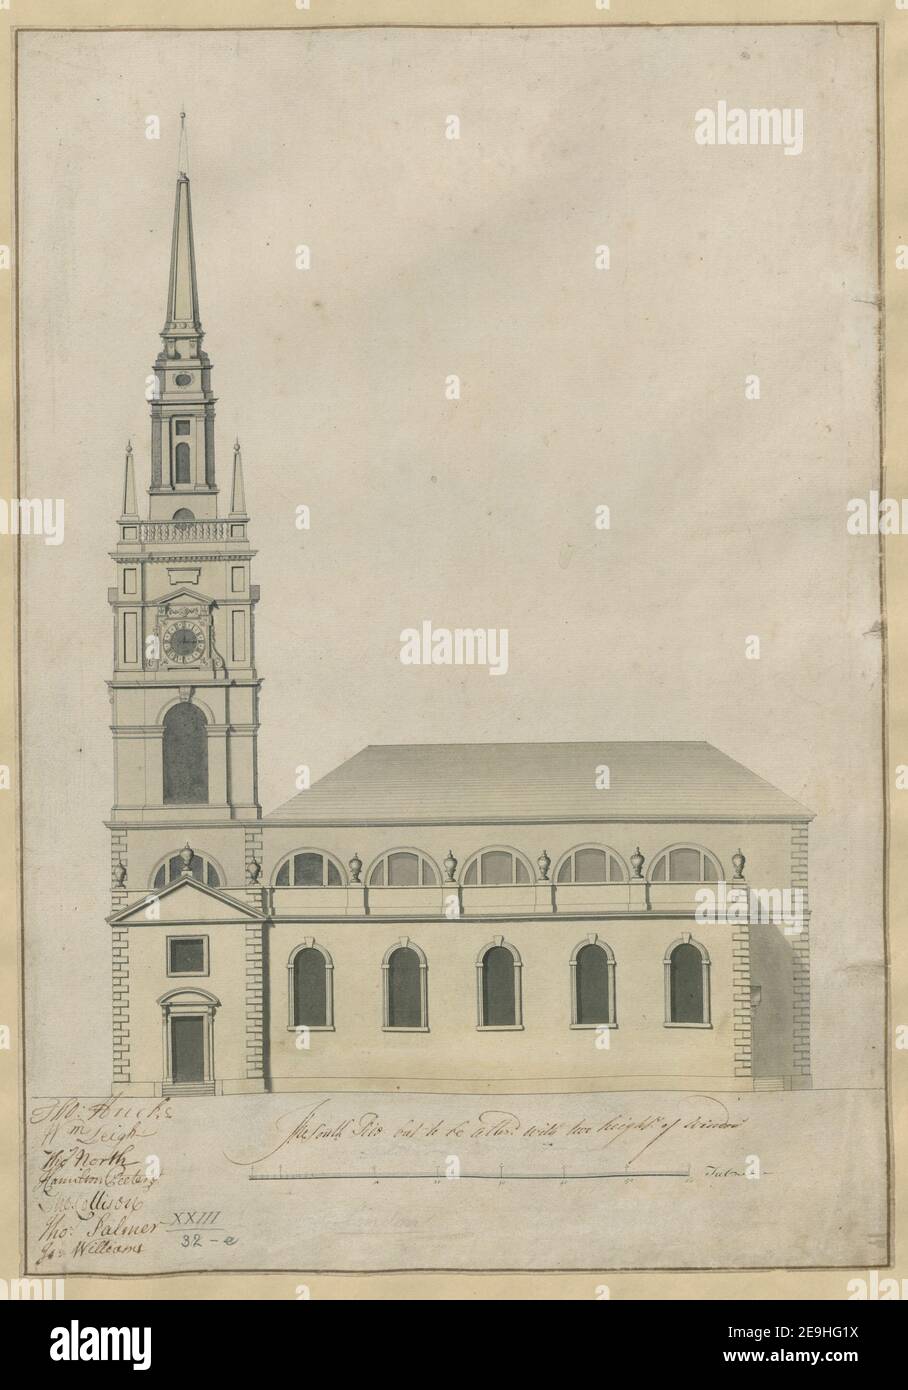 The South Side but to be Alterd with two heights of Windows  St. Olave's Church, Southwark . Author  Flitcroft, Henry 23.32.e. Date of publication: [1737]  Item type: 1 drawing Medium: pen and black ink with monochrome and yellow wash Dimensions: sheet 50 x 35.2 cm  Former owner: George III, King of Great Britain, 1738-1820 Stock Photo